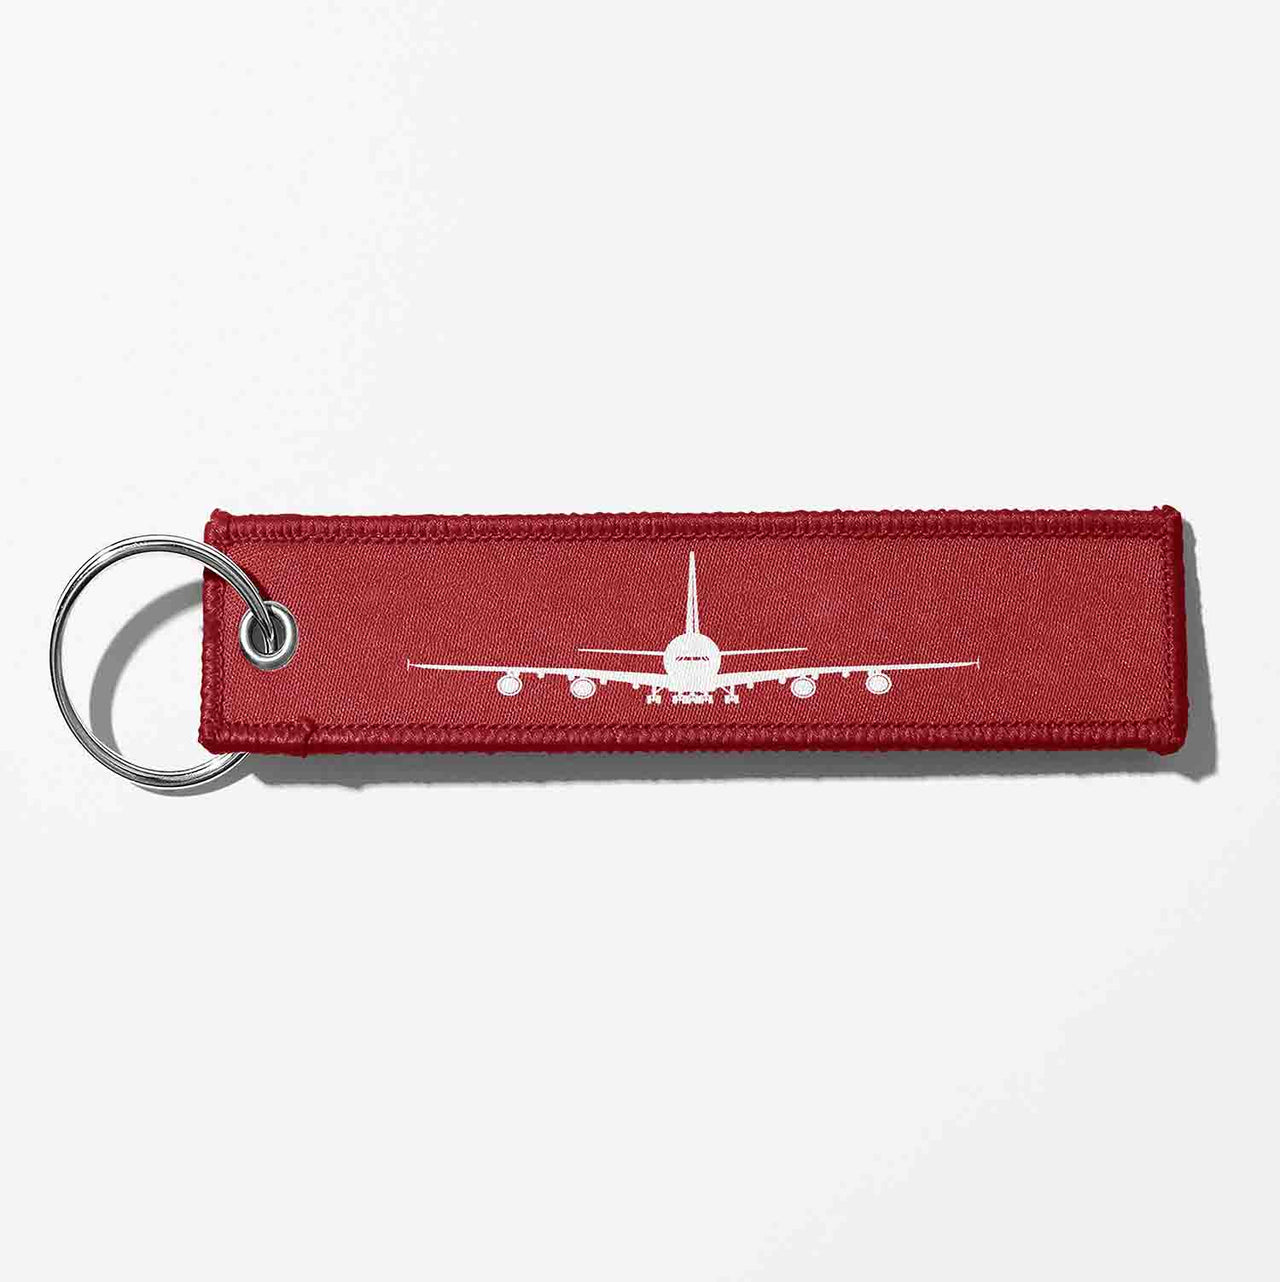 Airbus A380 Silhouette Designed Key Chains